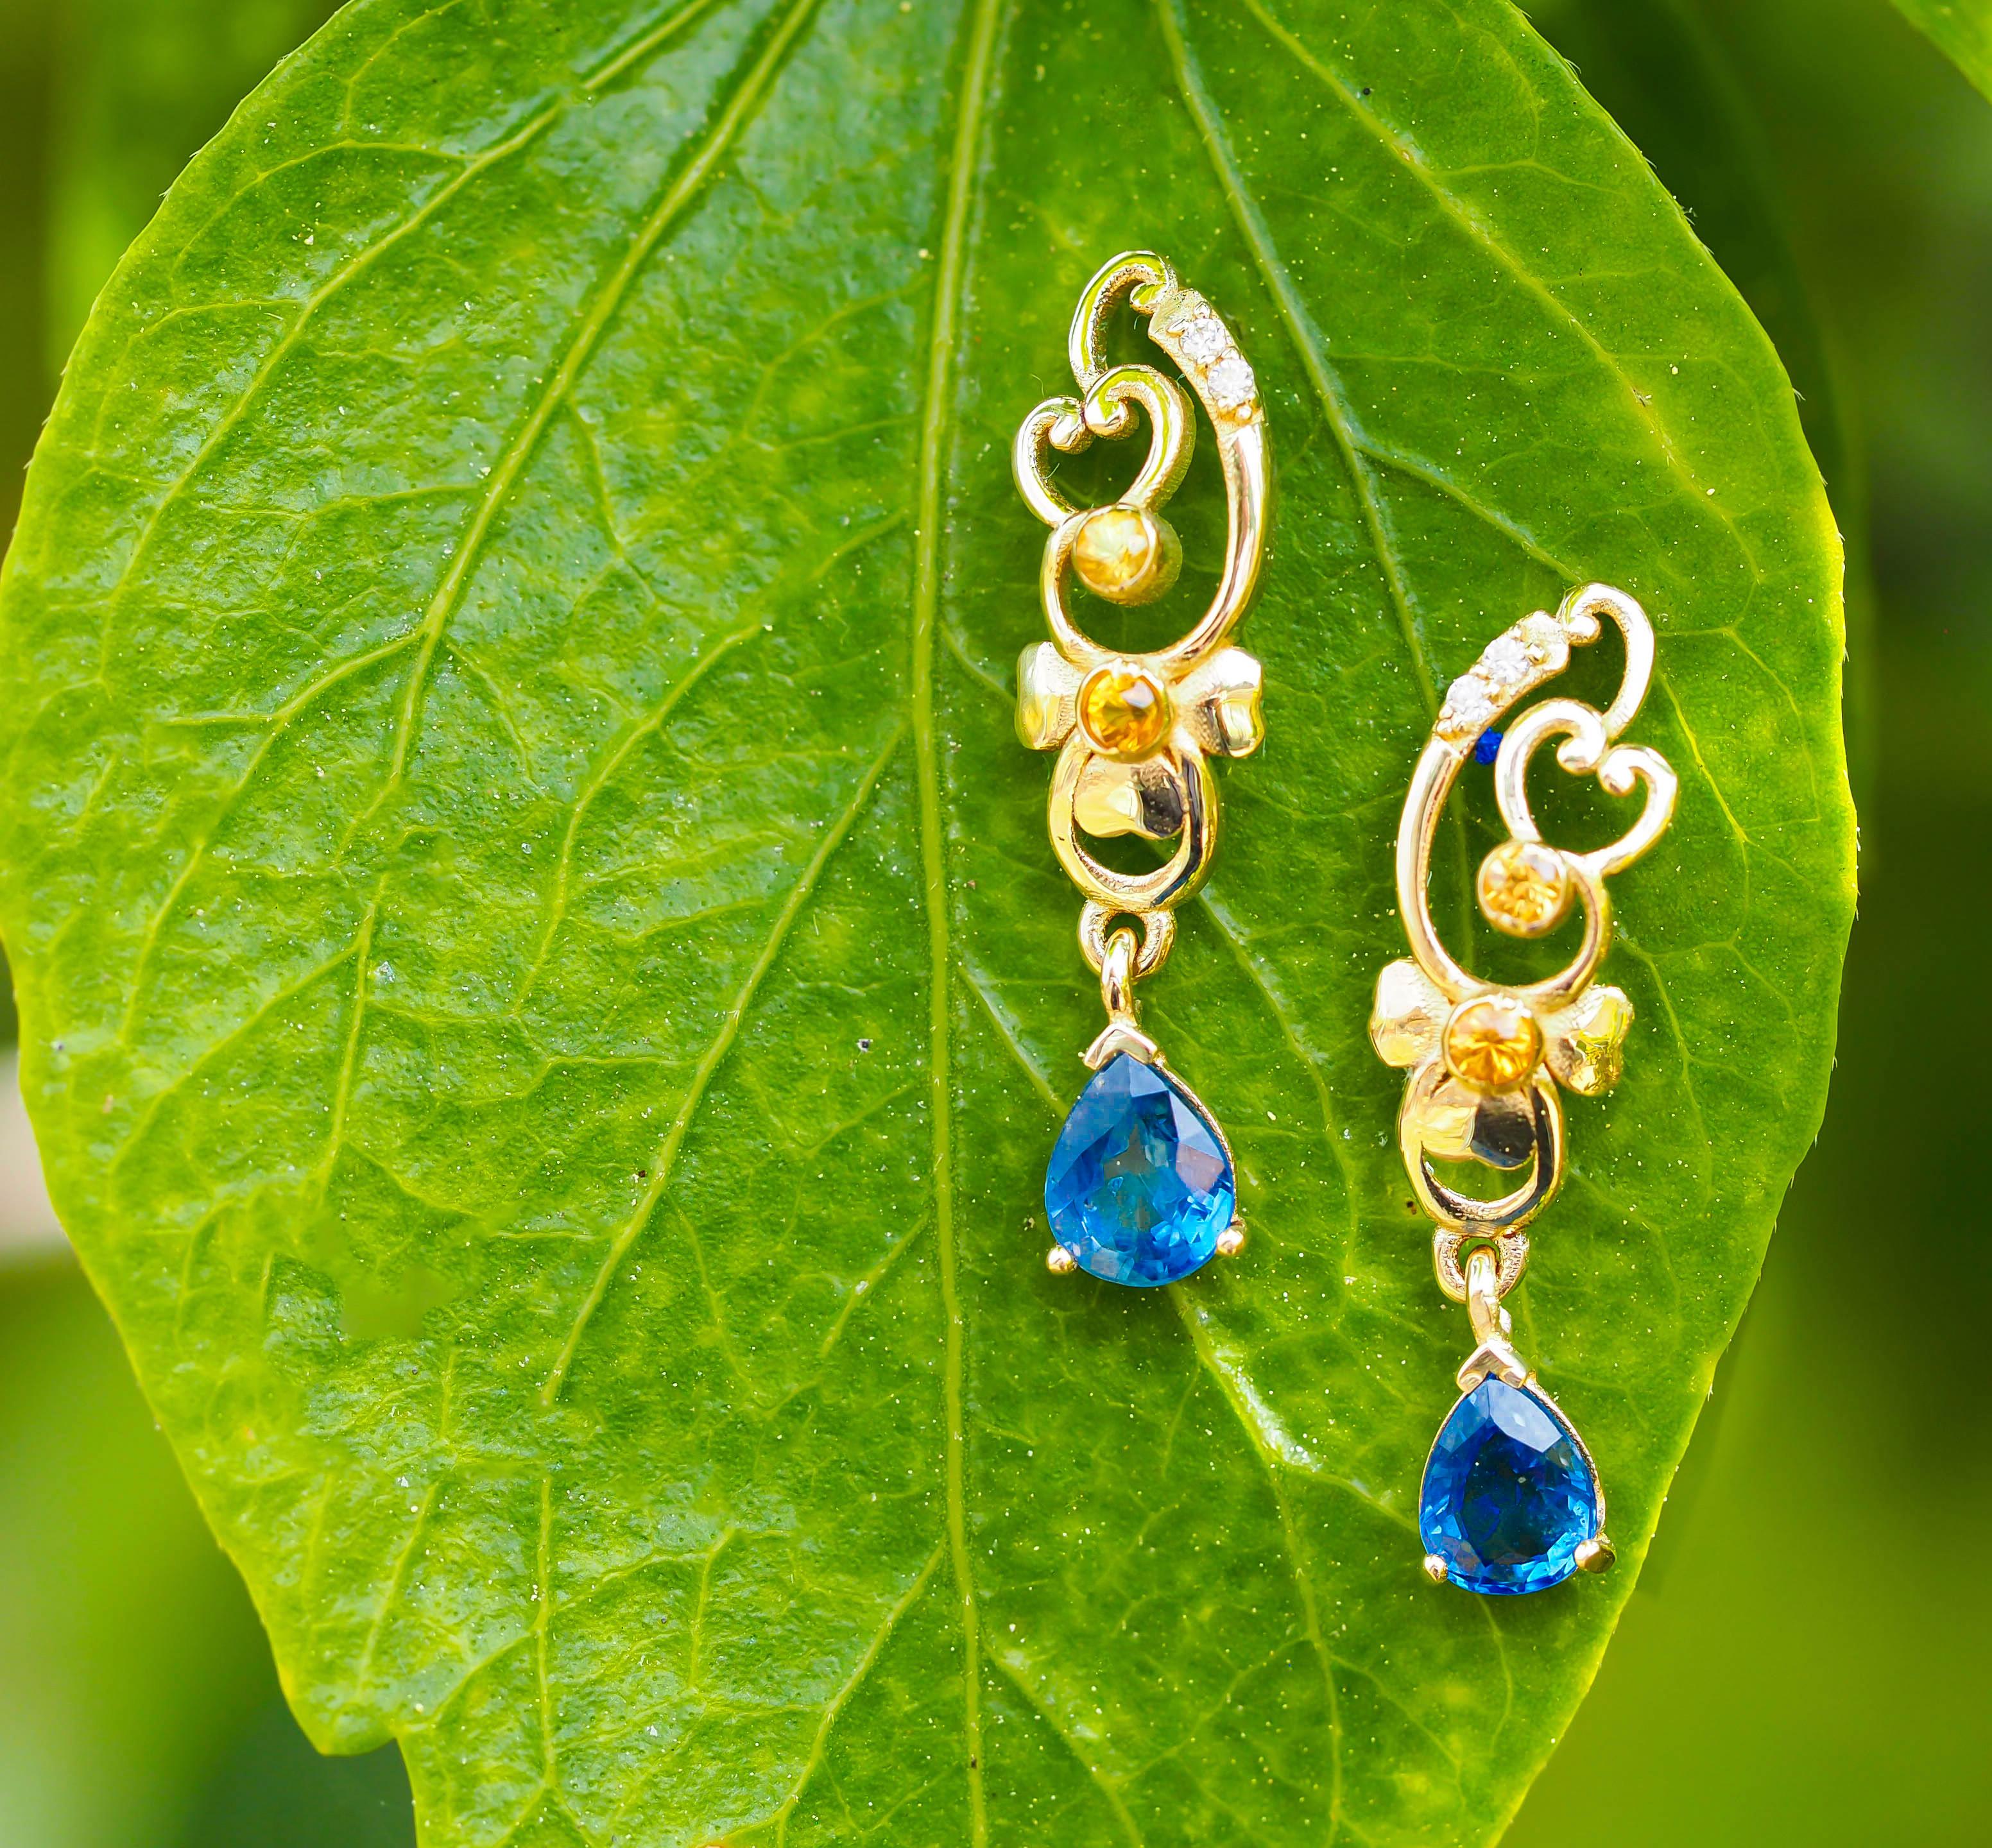 14 Karat Gold Earrings Studs with Sapphires and Diamonds For Sale 4